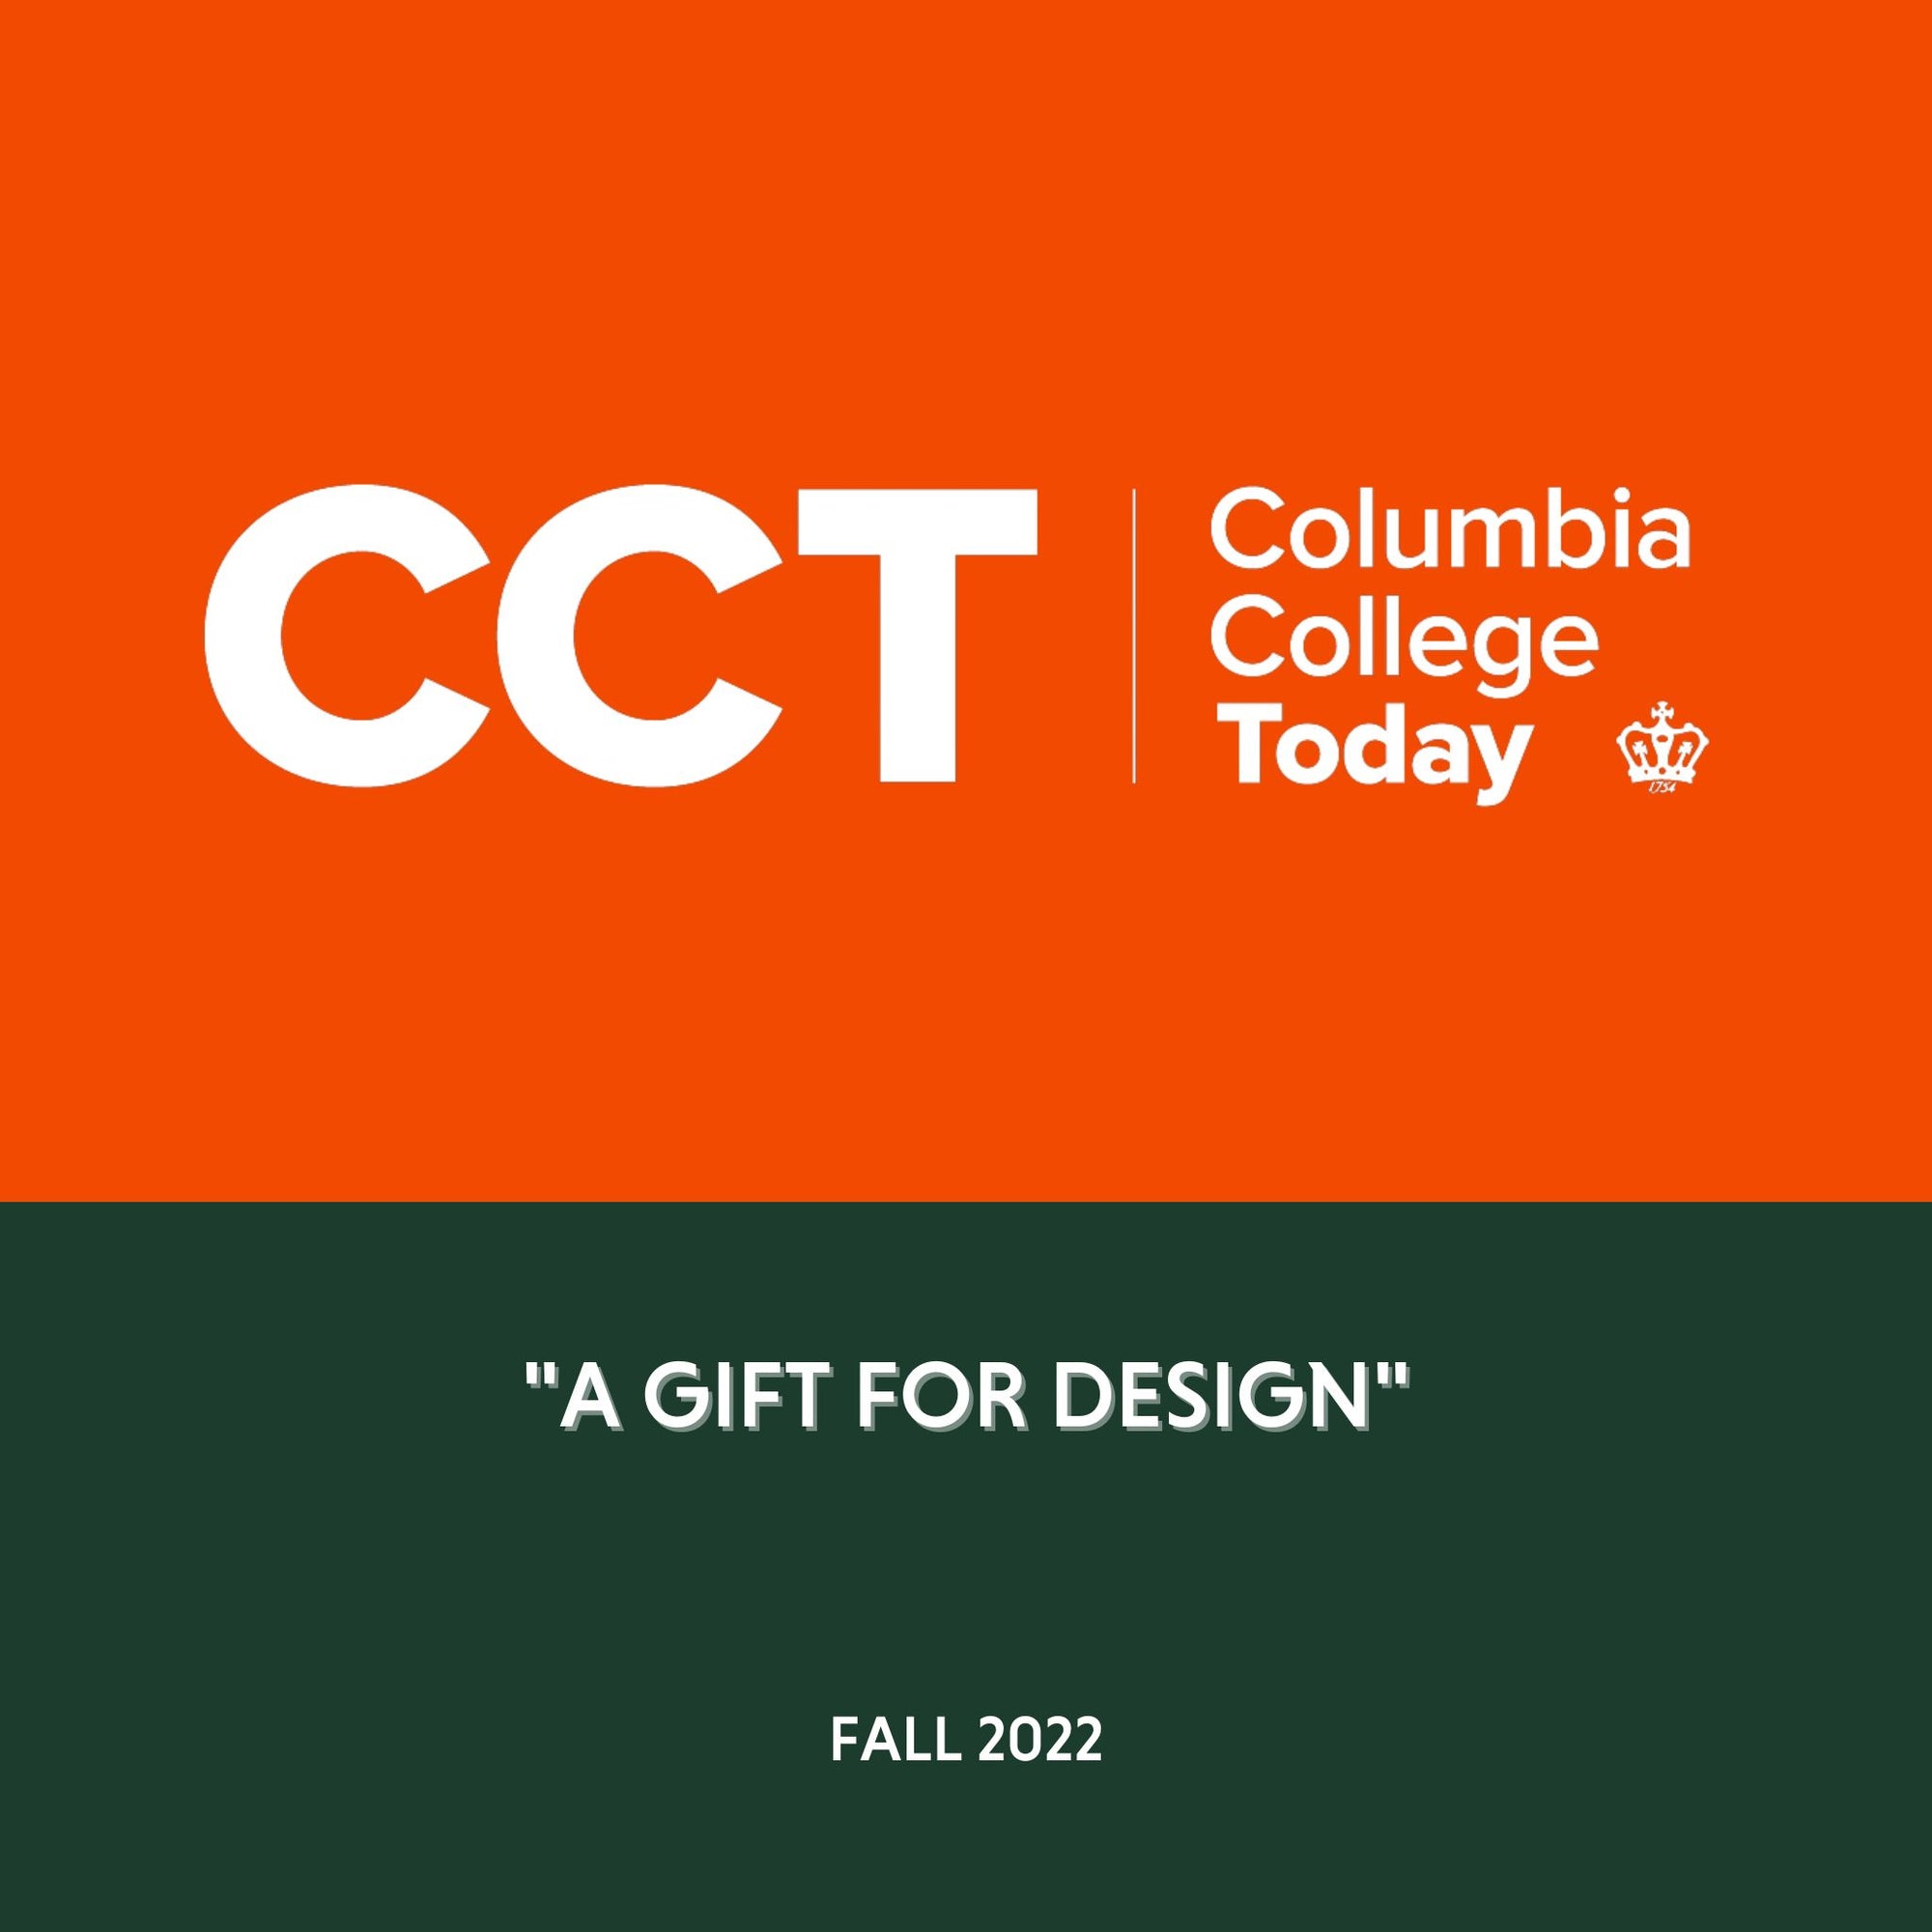 Columbia College Today - "A Gift for Design" - Fall 2022